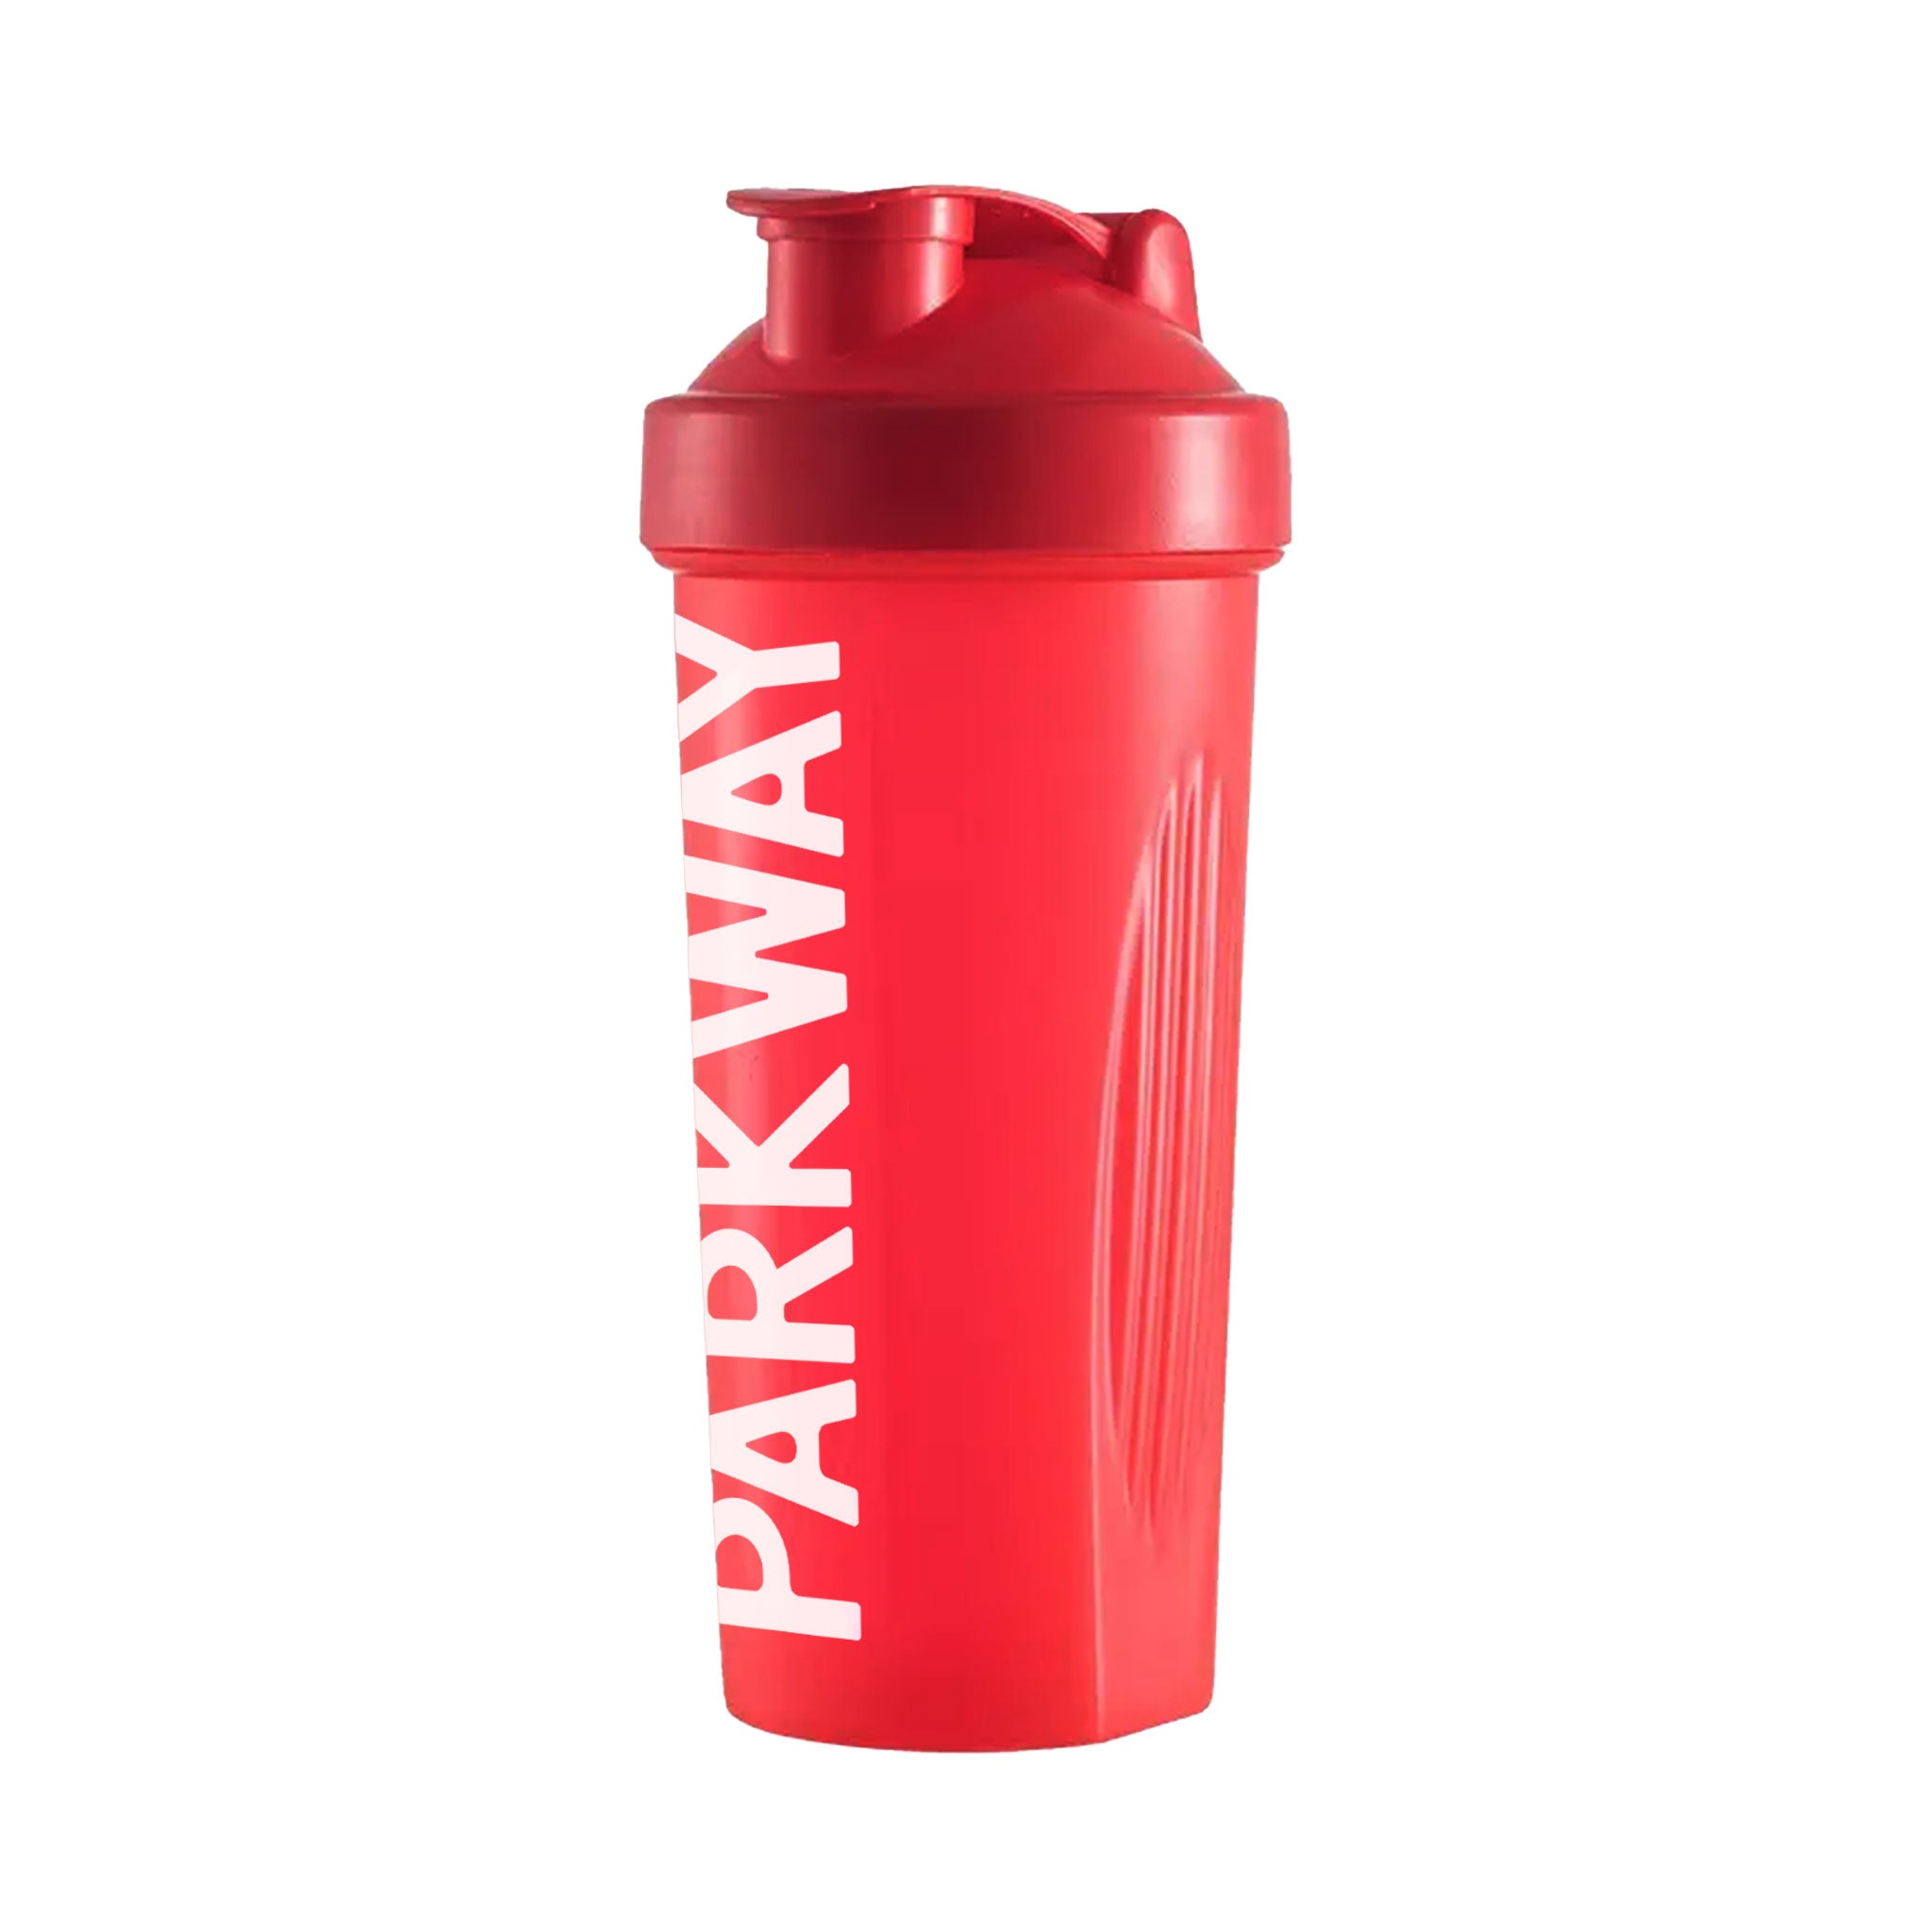 Pour Sports Shaker Cup